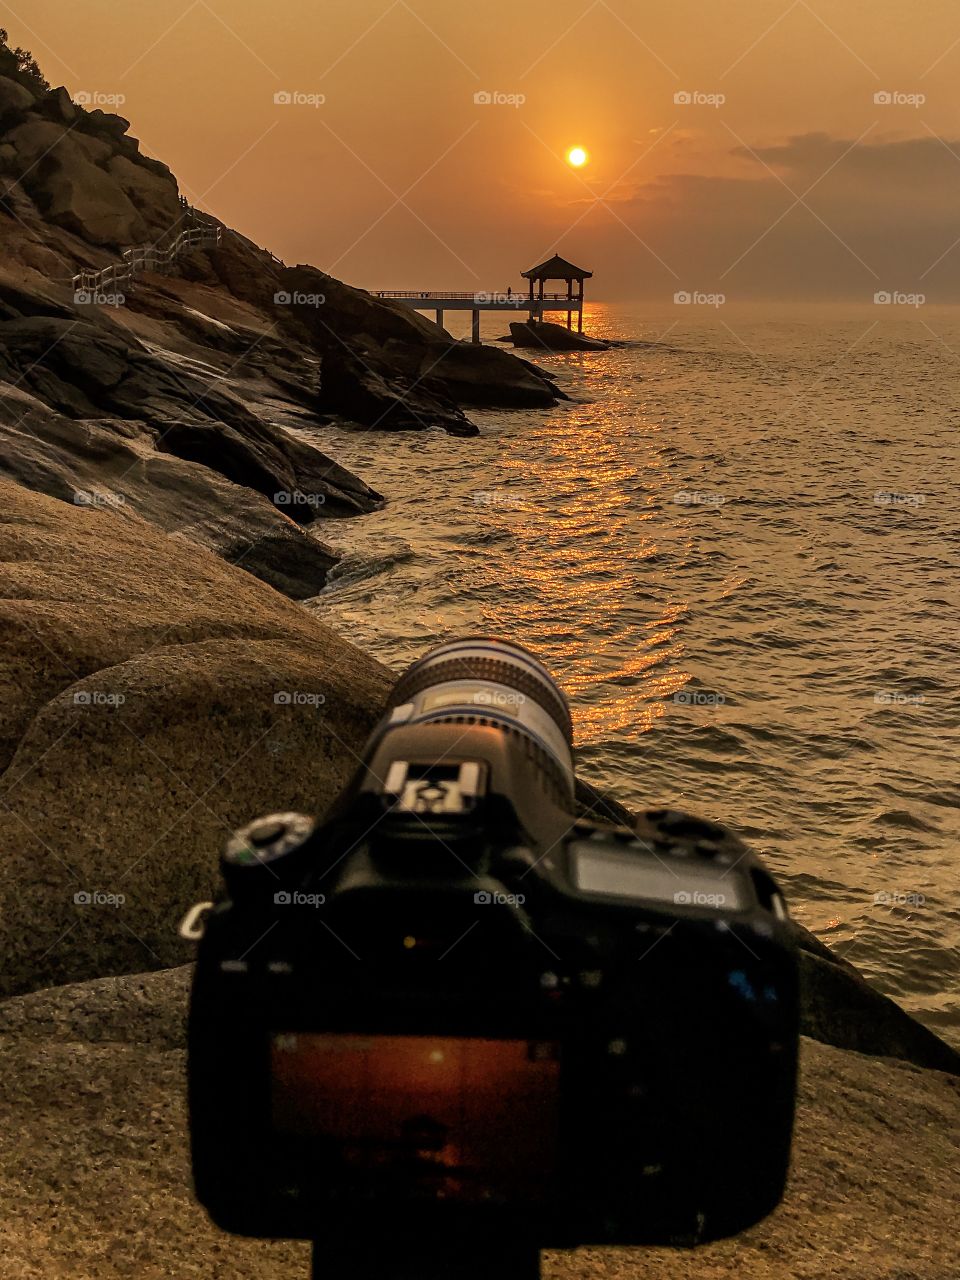 Camera in Action... my Canon Dslr with canon Telephoto lens before the shot... Coastal Sunrise. Mobile shot by iphone 7 plus..Landscape photography.